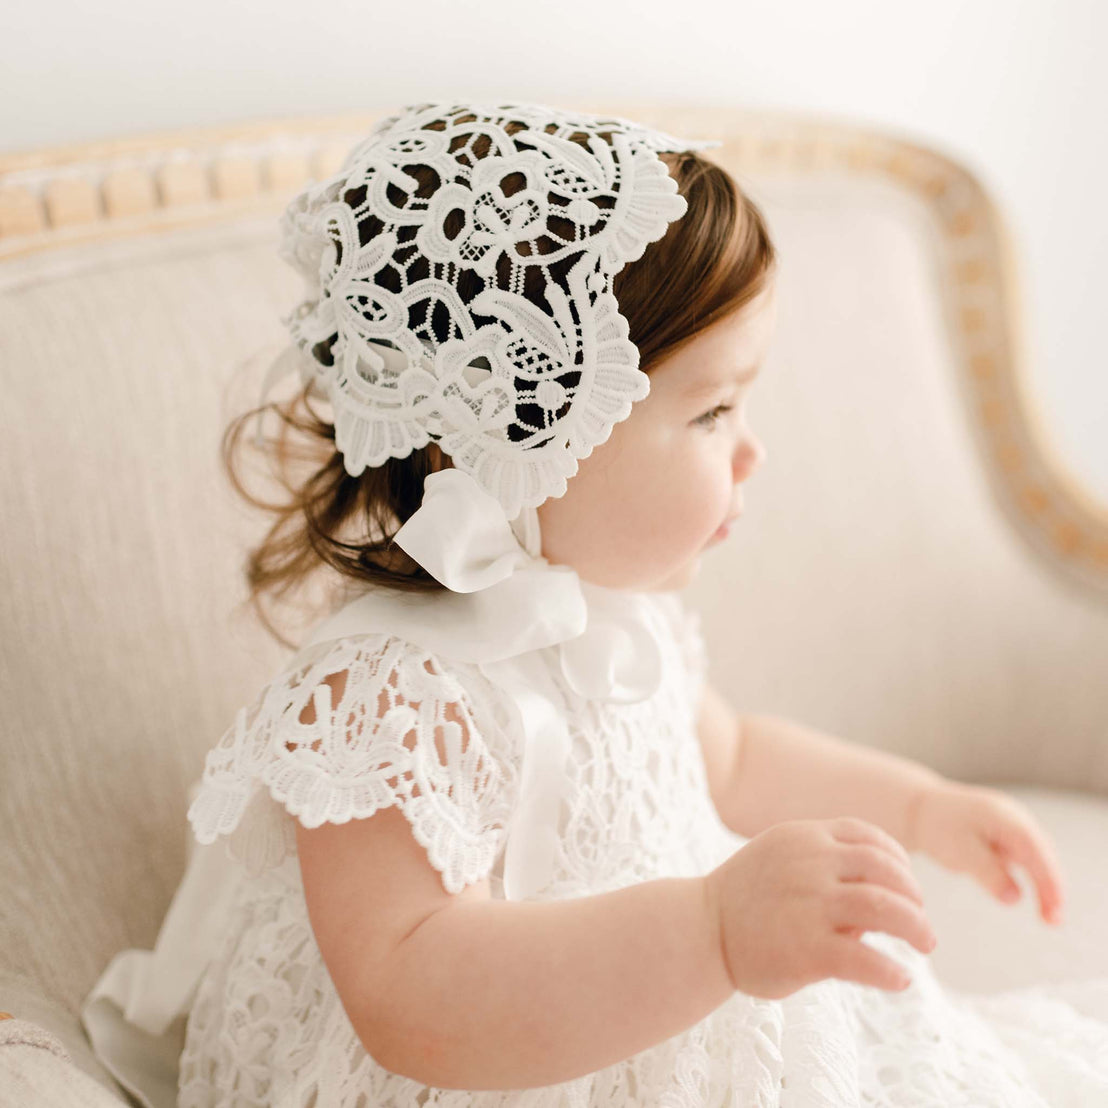 Baby girl sitting on a chair and wearing the Lola Christening Gown and Bonnet.